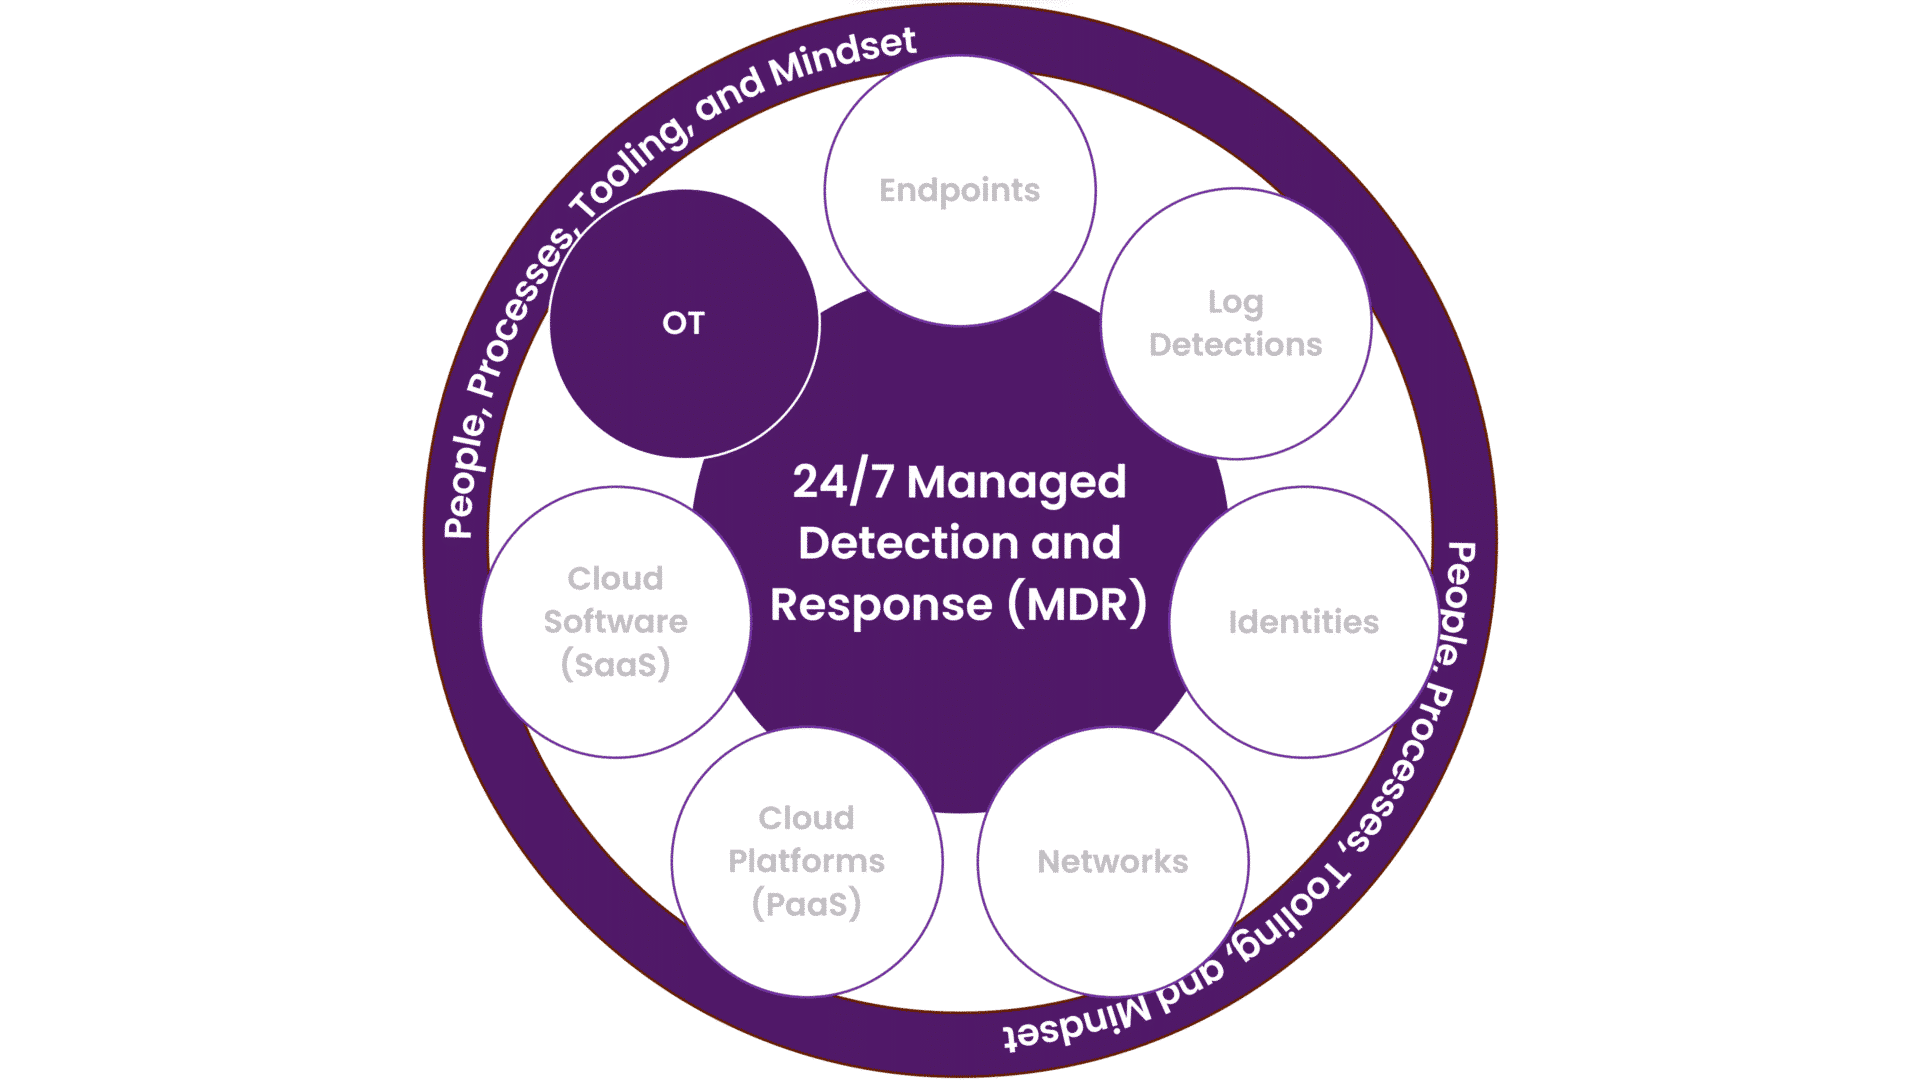 Illustration with the 24/7 managed detection and response service in the middle, and OT as one of the seven available modules (the others are: Endpoints, Log Detection, Identities, Networks, Cloud Platforms (PaaS), and Cloud Software (SaaS)). And enclosing them all are a circle with "People, Processes, Tooling and Mindset".
This to illustrate the parts of a SOC.